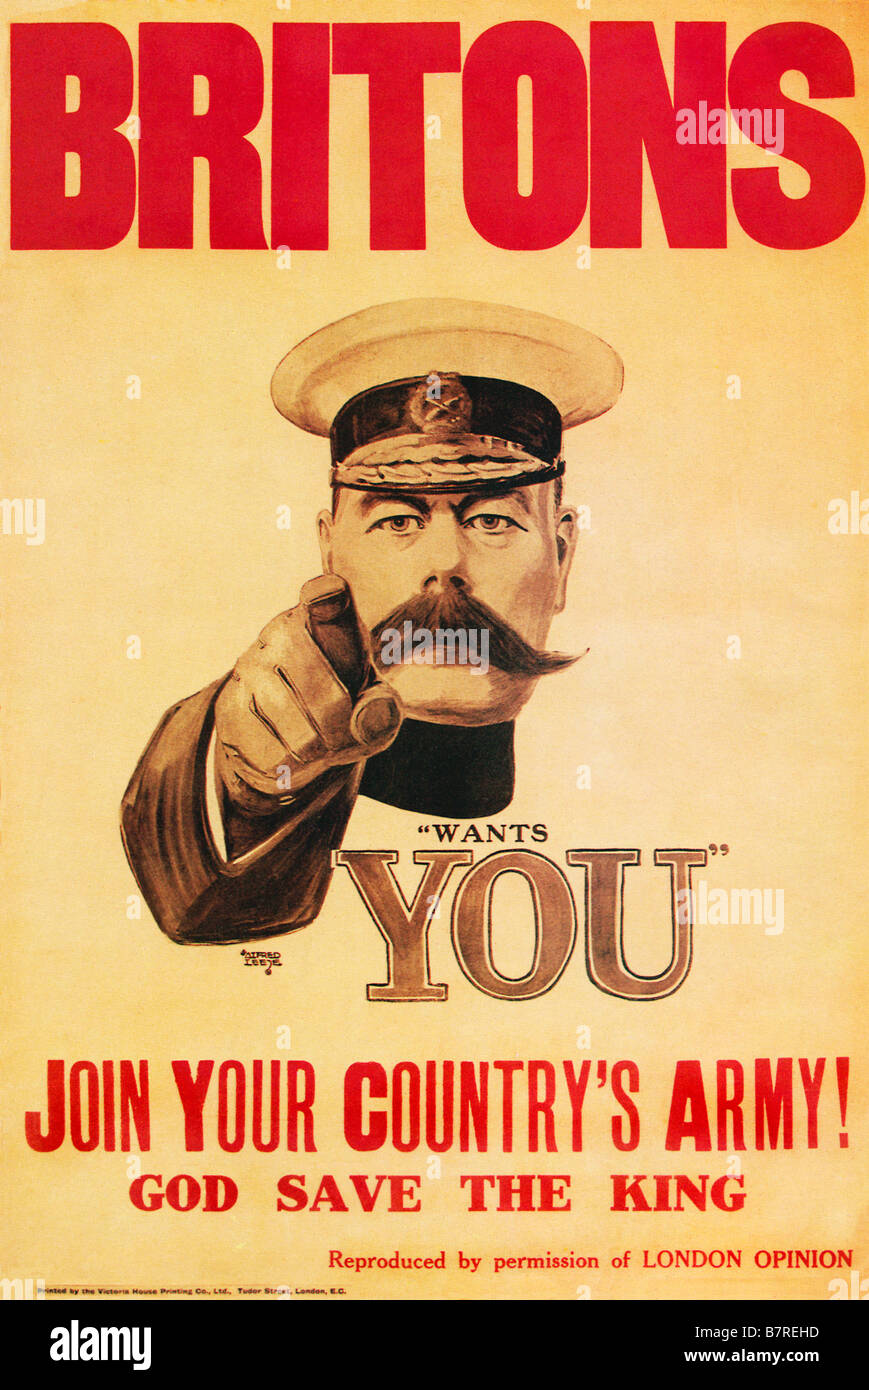 Britons Kitchener Wants You iconic Great War recruiting poster based